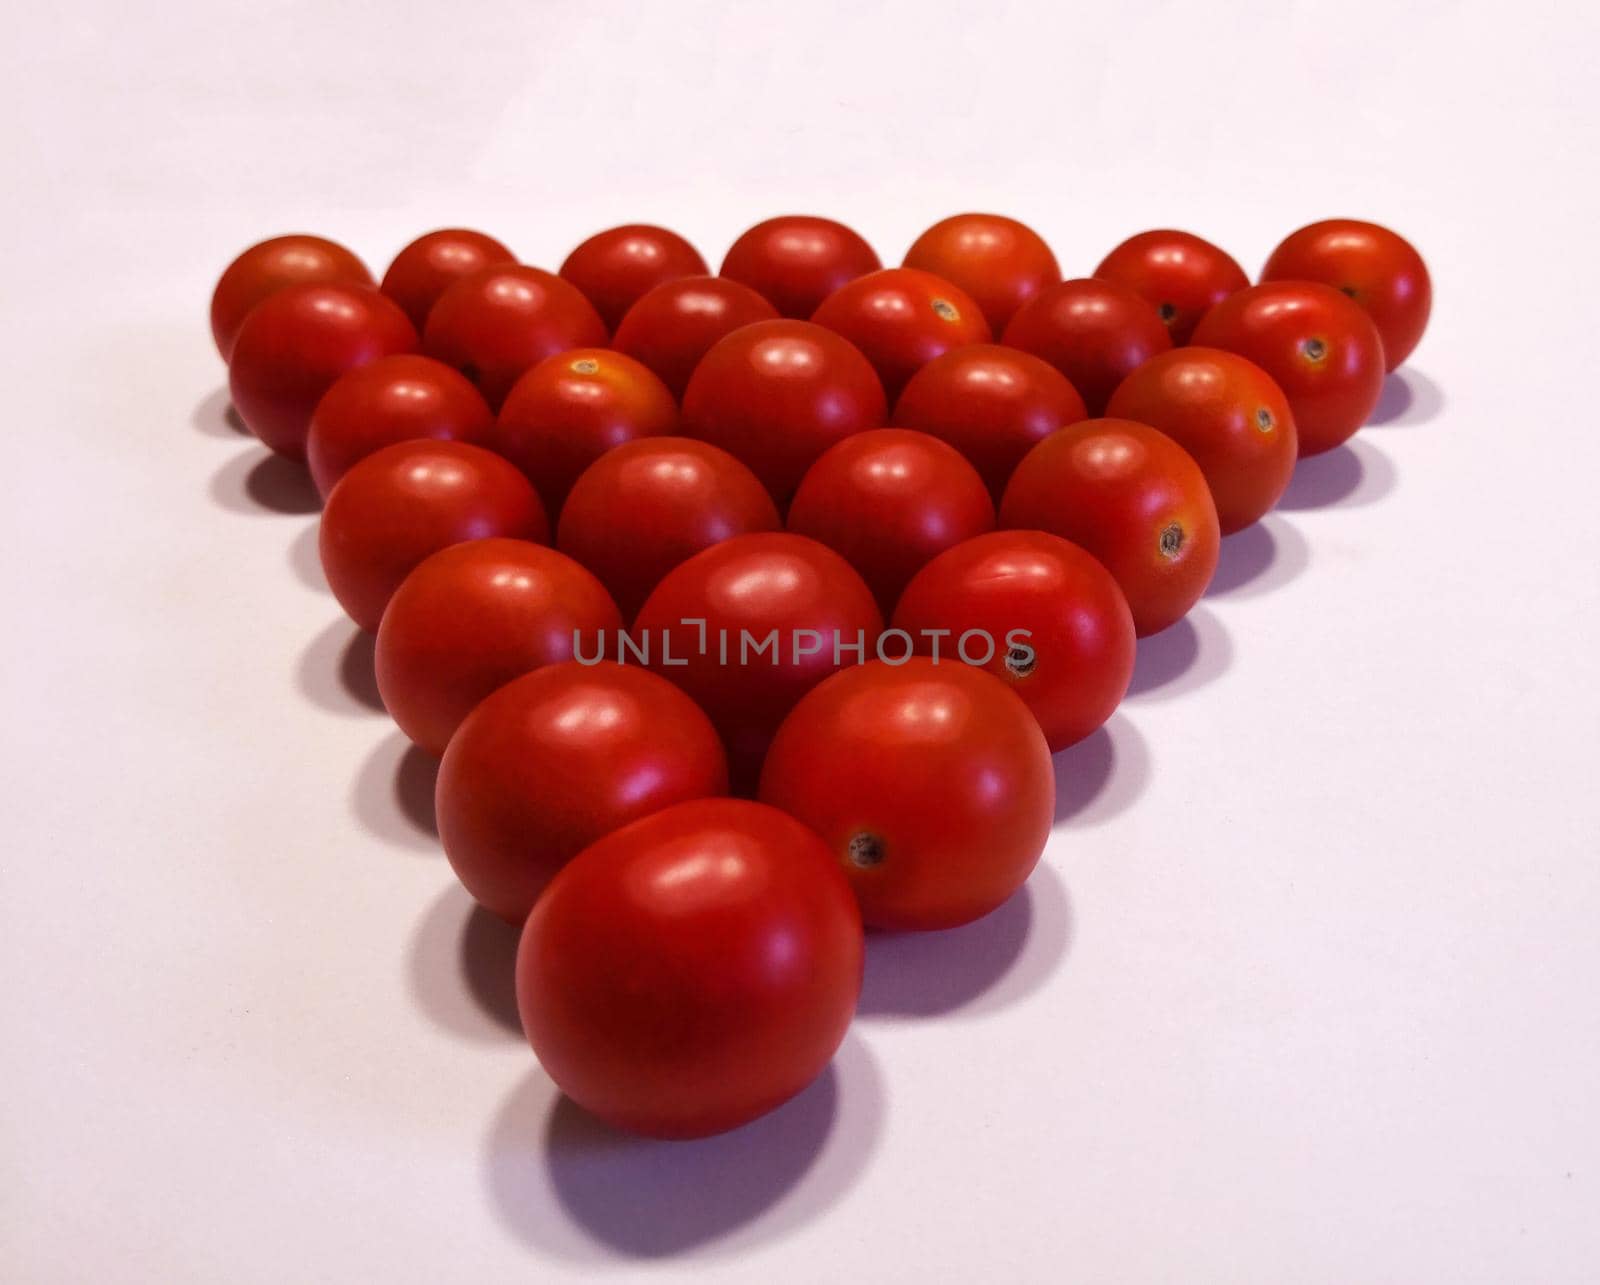 Red cherry tomatoes, close up, isolated